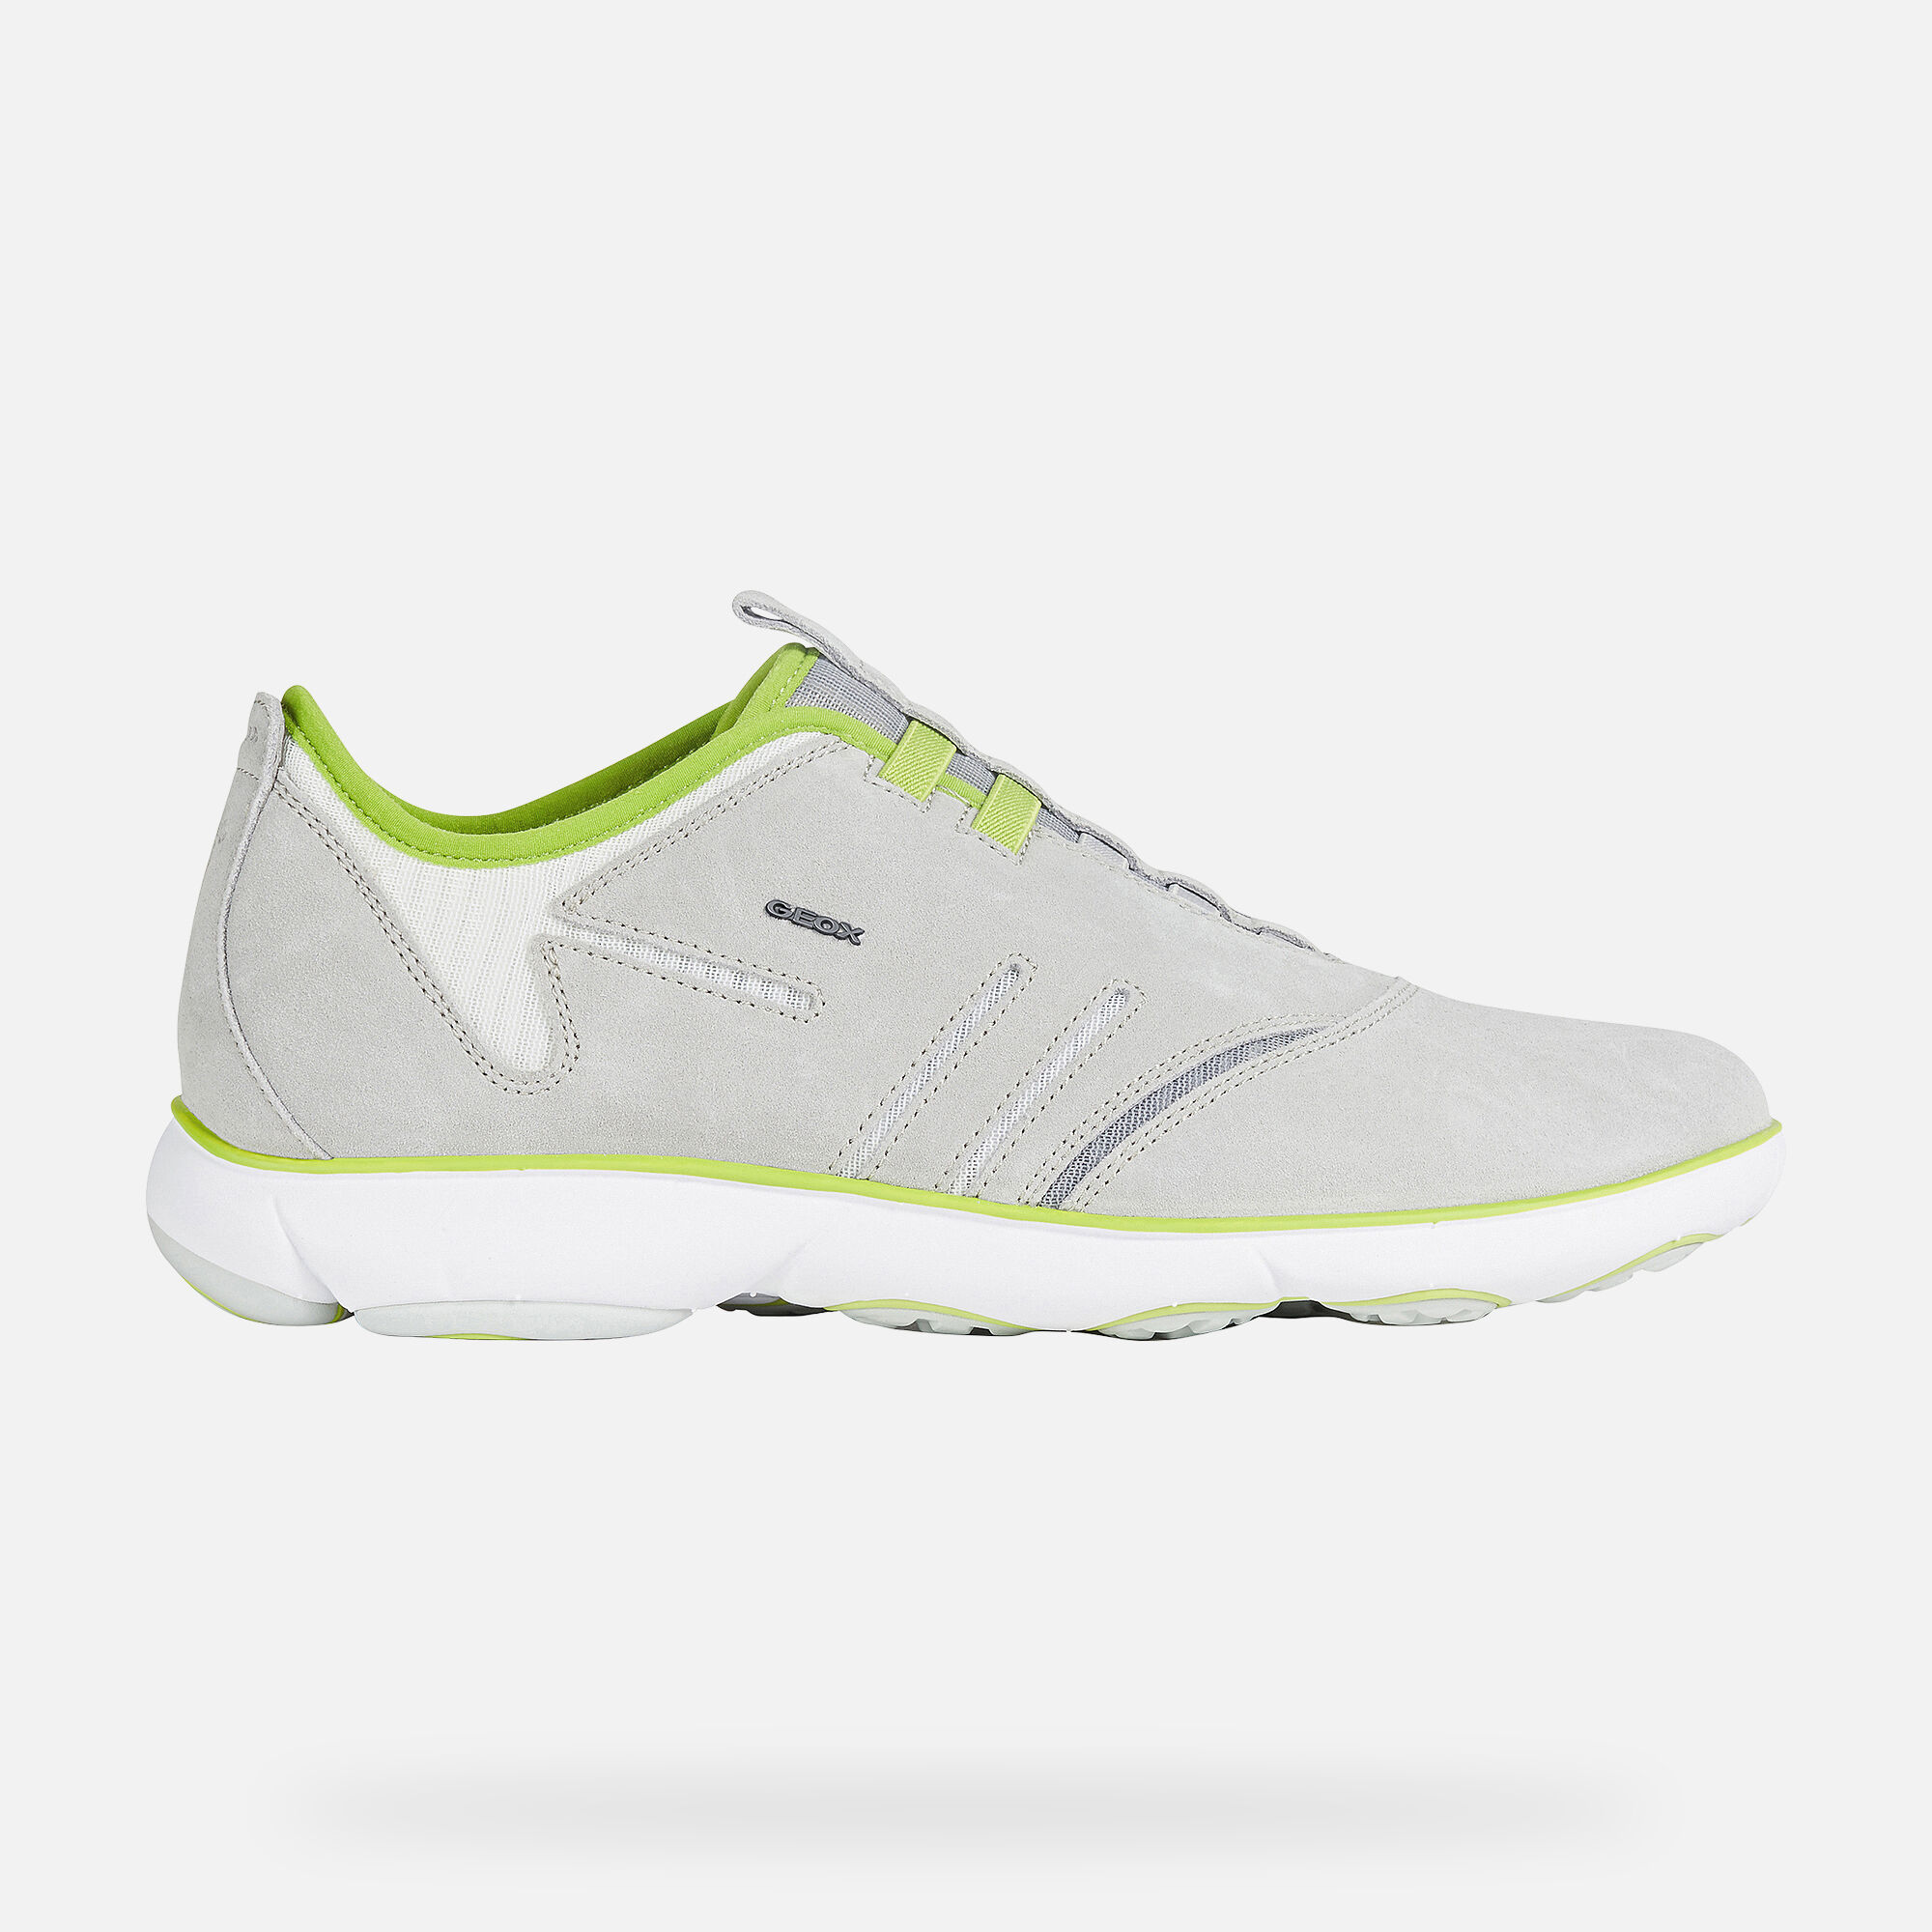 geox green shoes